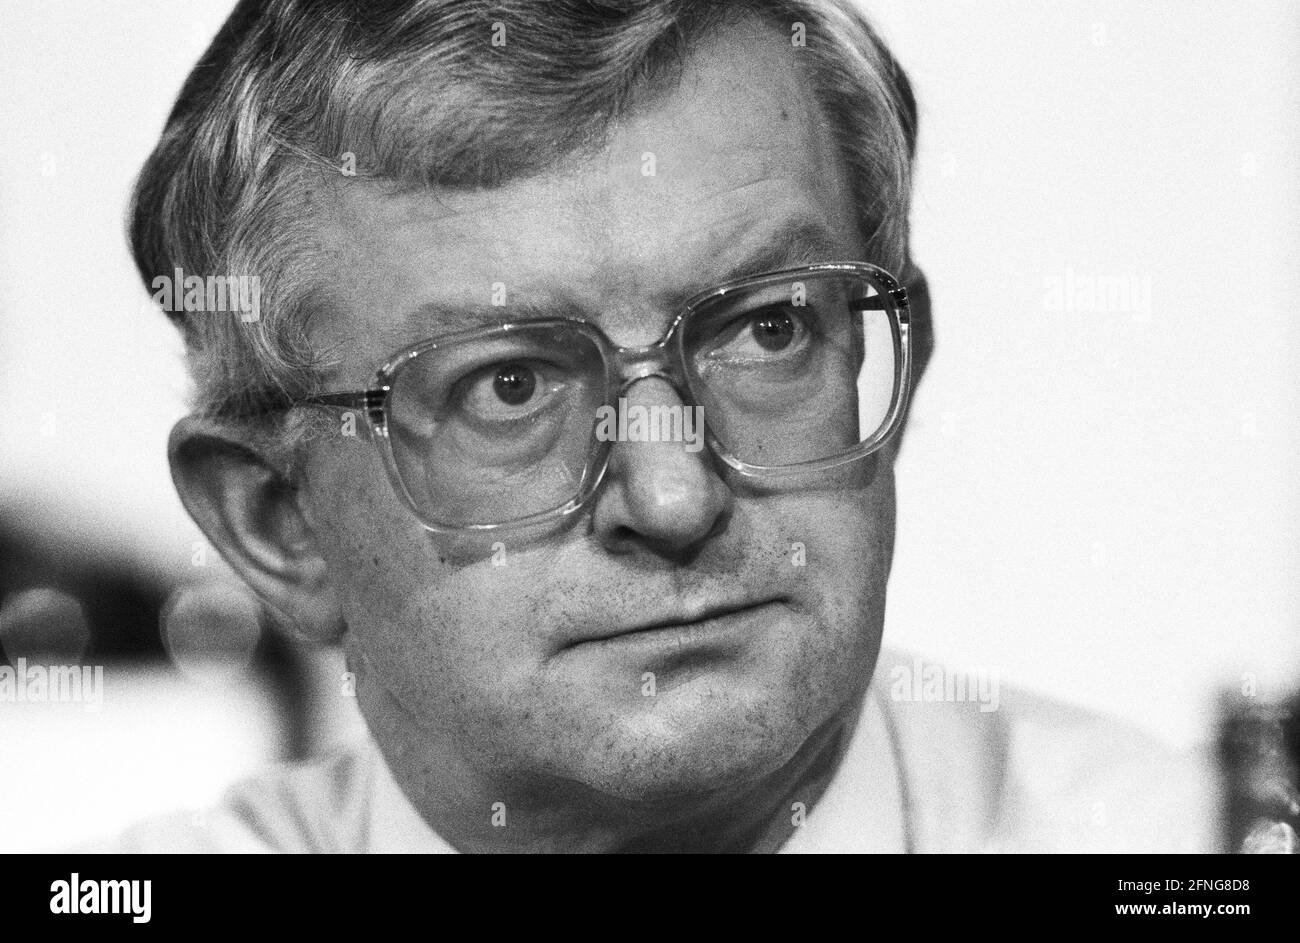 Germany, Hanover, 13.10.1989. Archive No: 09-55-09 CDU state party conference Lower Saxony Photo: Rudorf Seiters [automated translation] Stock Photo